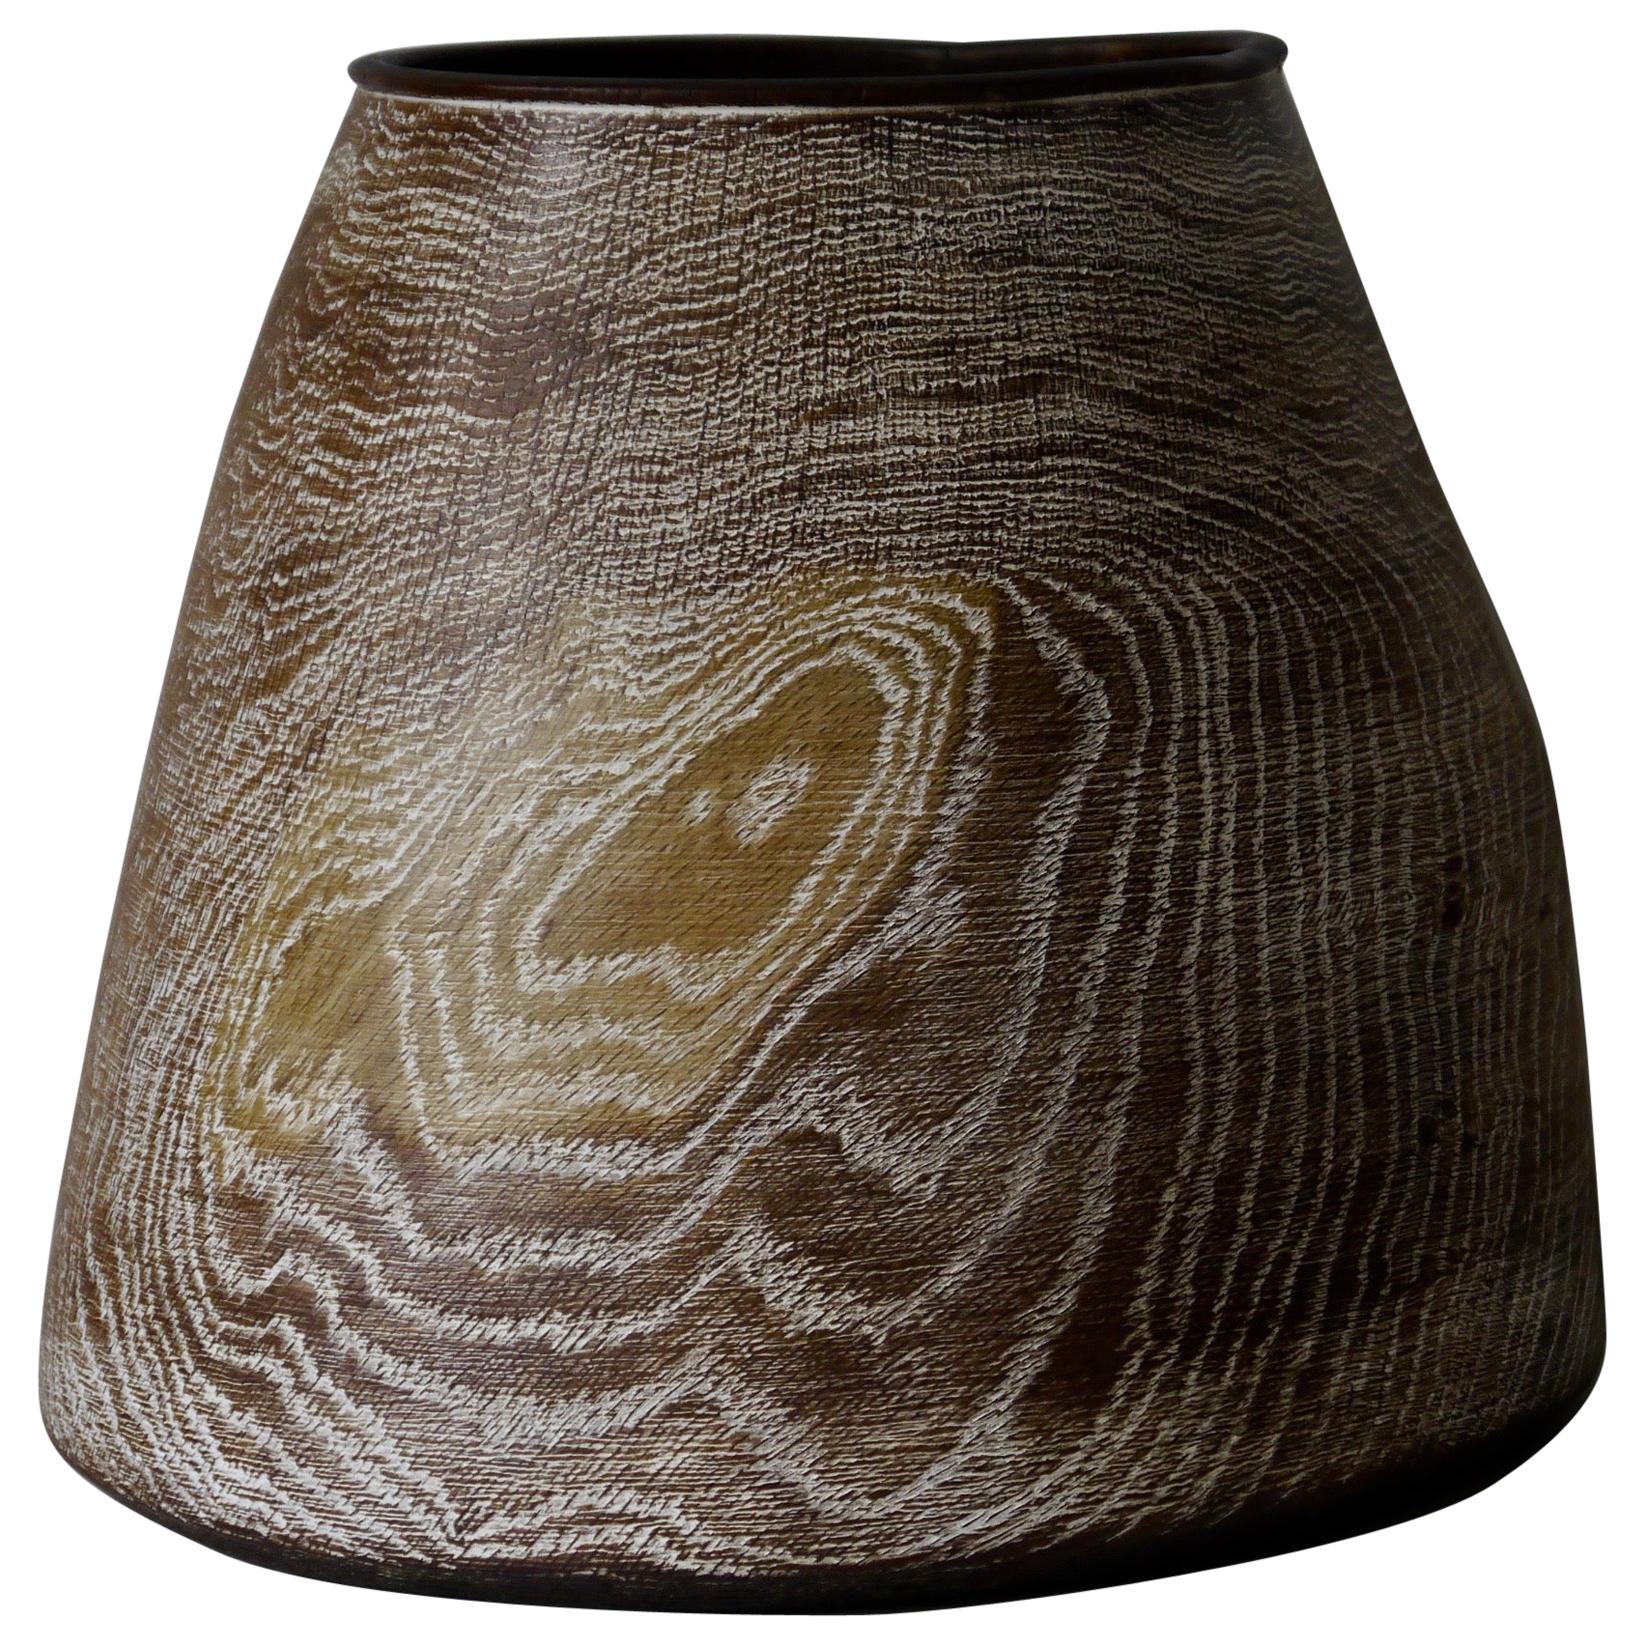 Limed and Oiled Oak Vessel by Fritz Baumann